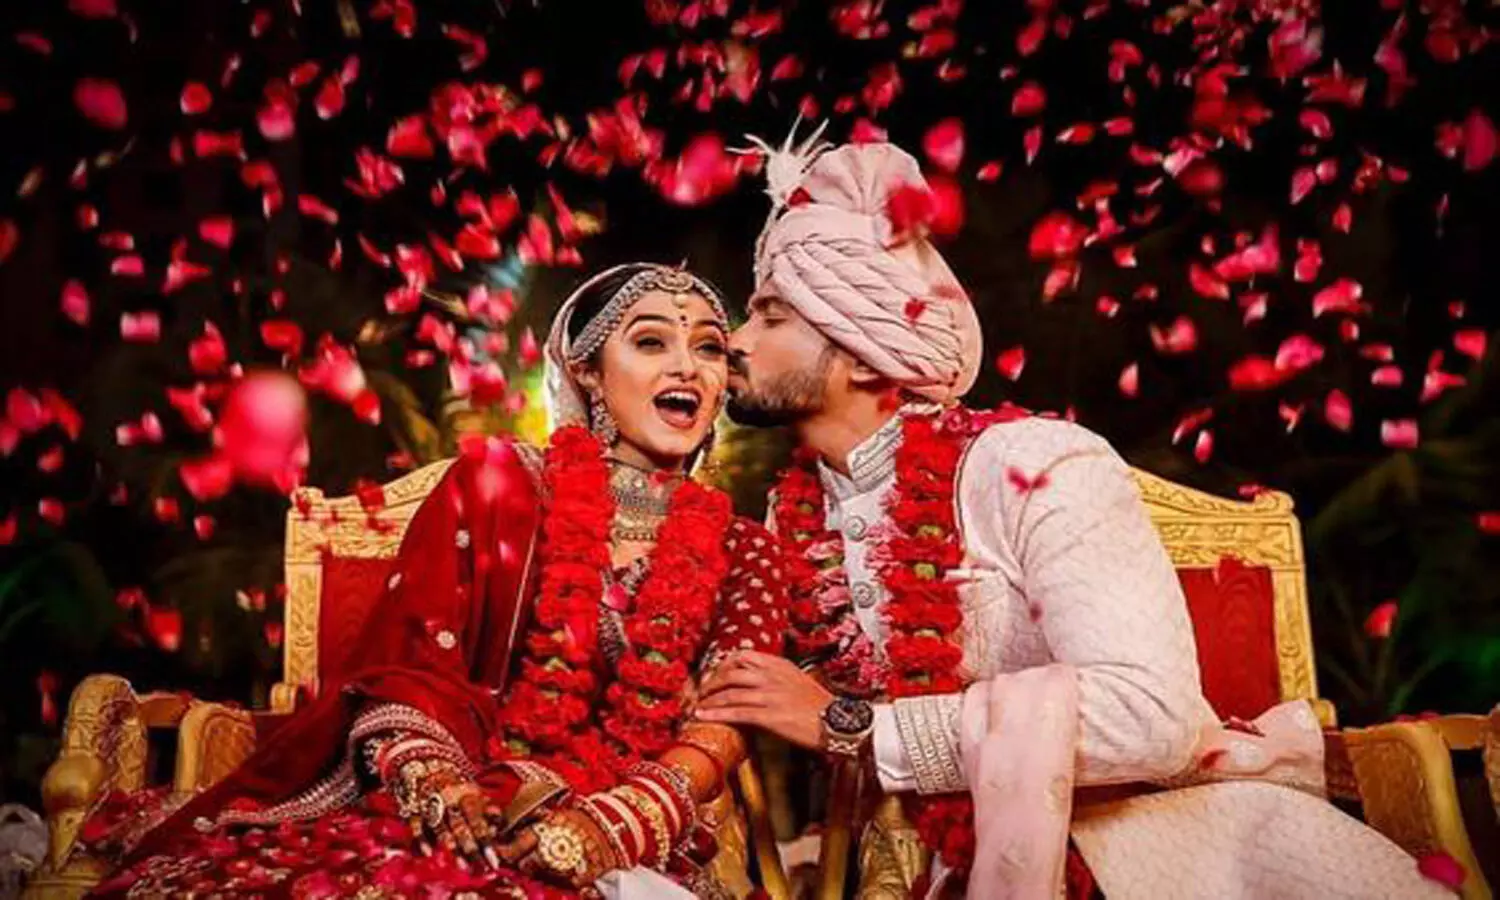 Major Facts that suggest arranged marriages work better than love marriages